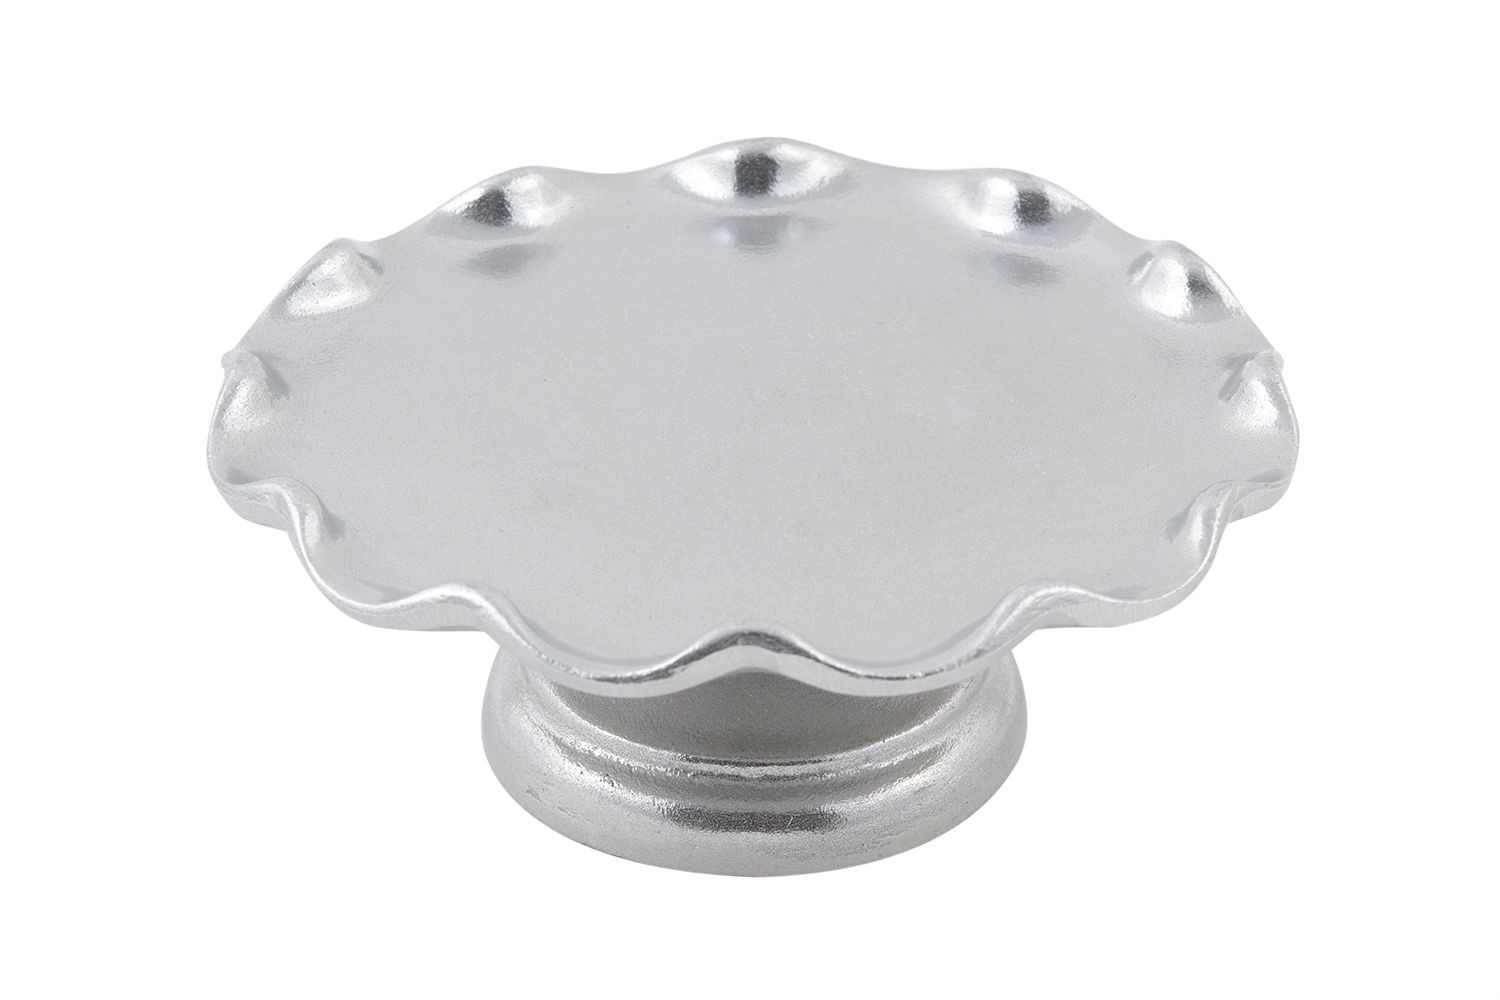 Bon Chef 9937P Scalloped Cake Stand with Pedestal, Pewter Glo 8" Dia.